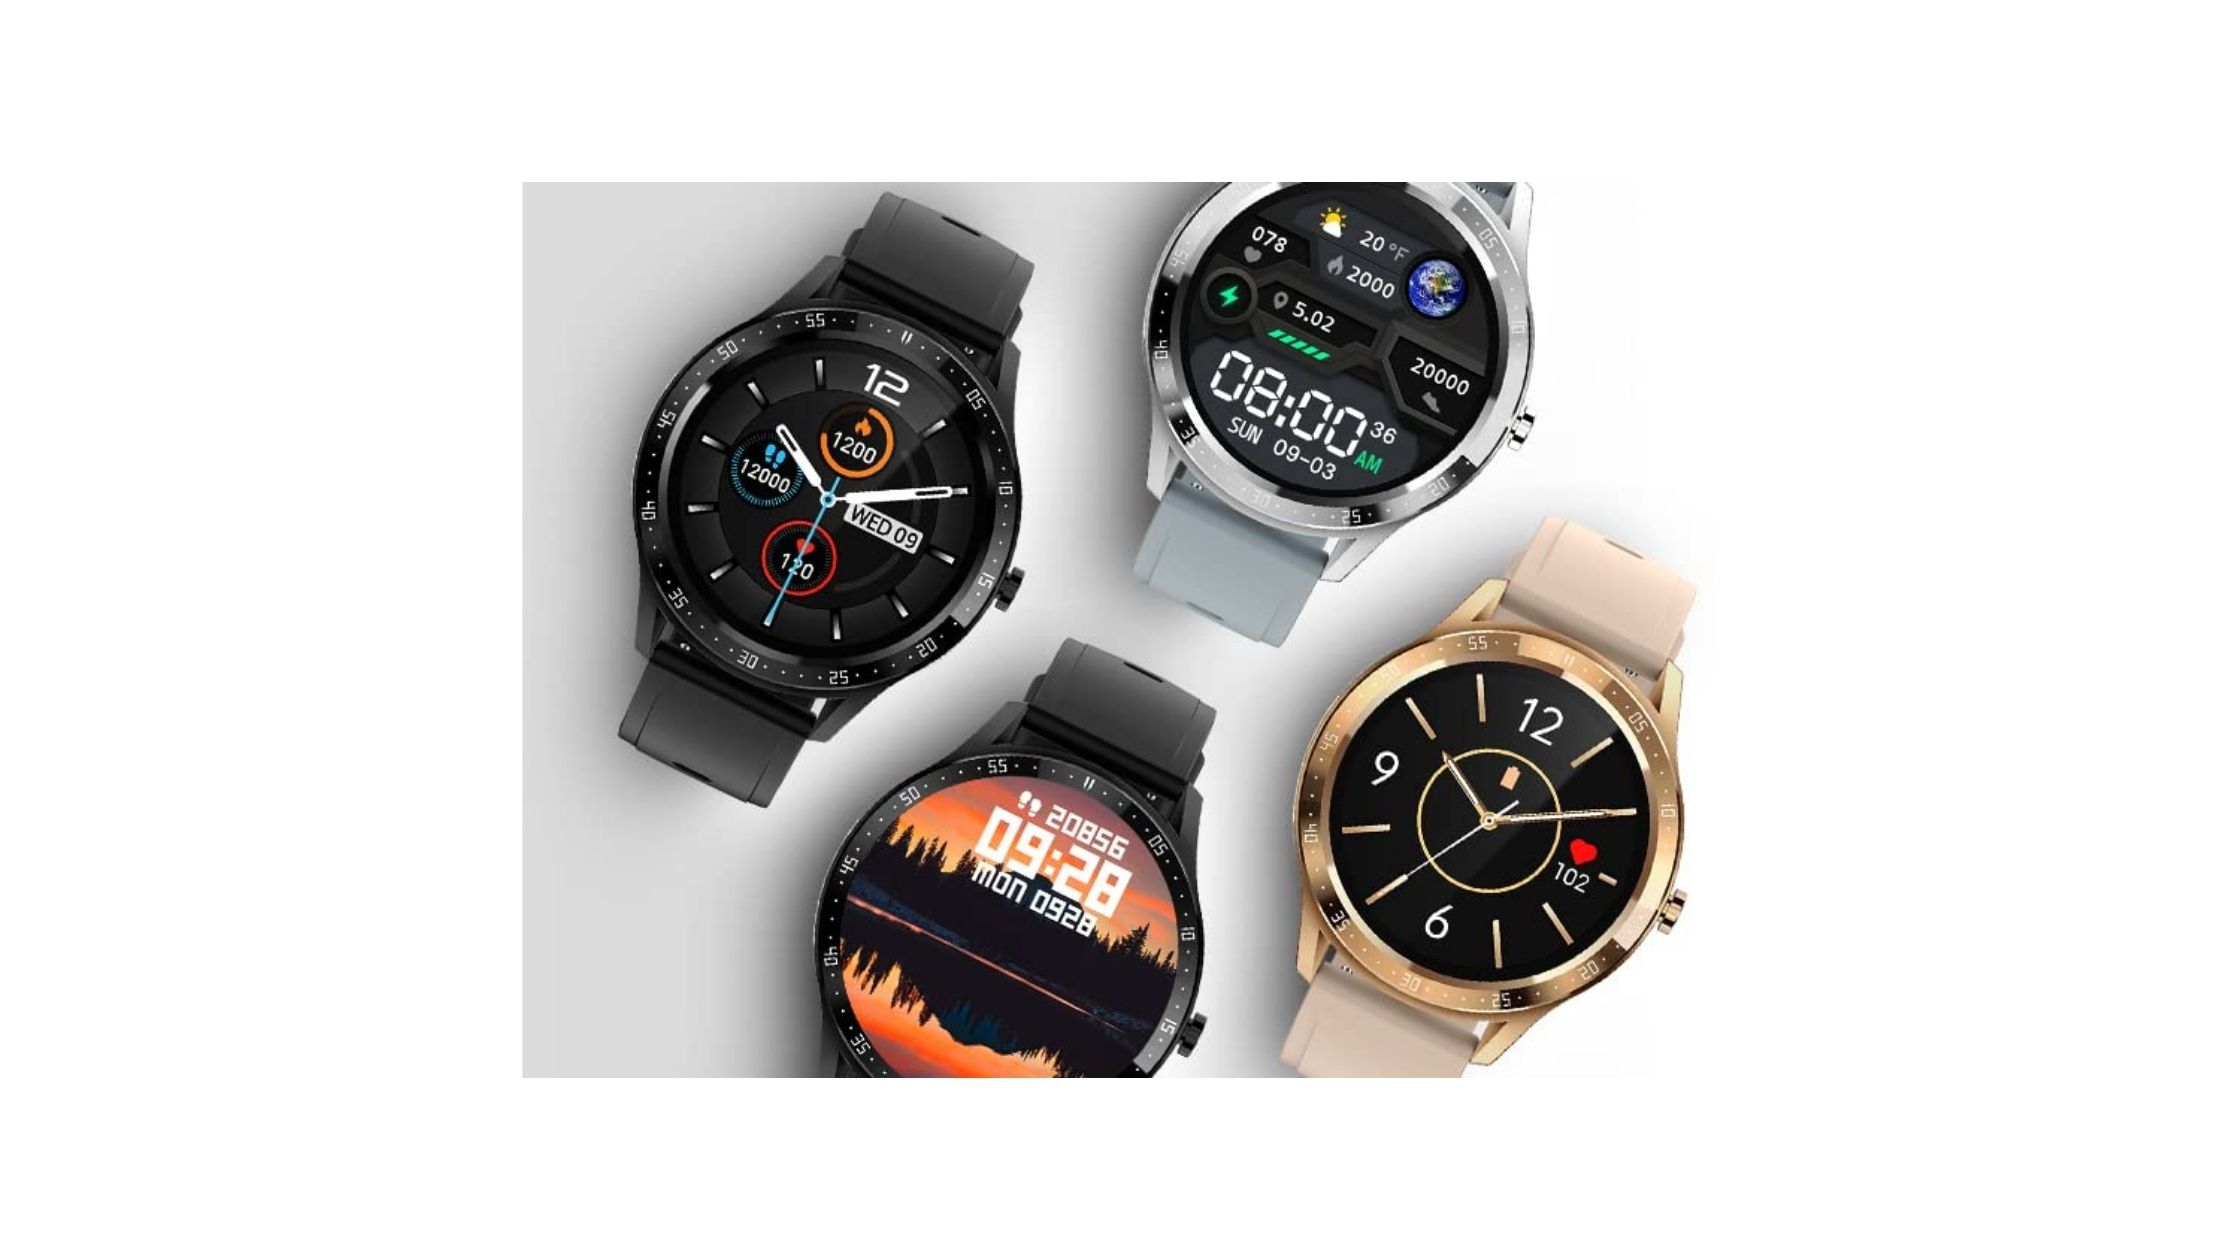 Fire Boltt 360 smartwatch with in-built games launched at Rs 3,499